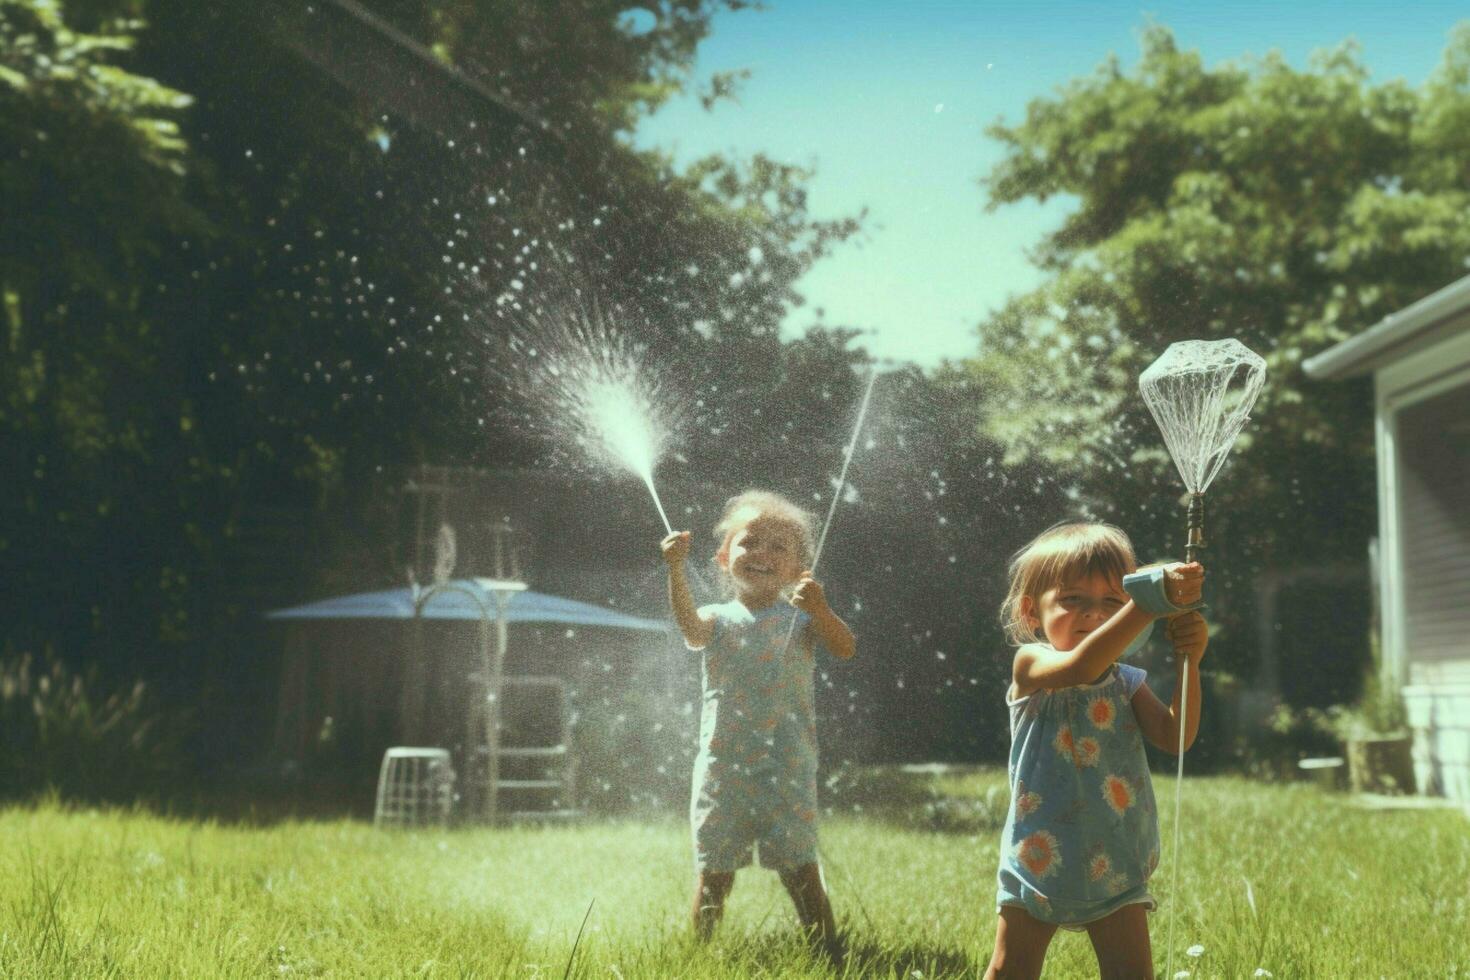 Kids playing with water guns on a hot day photo